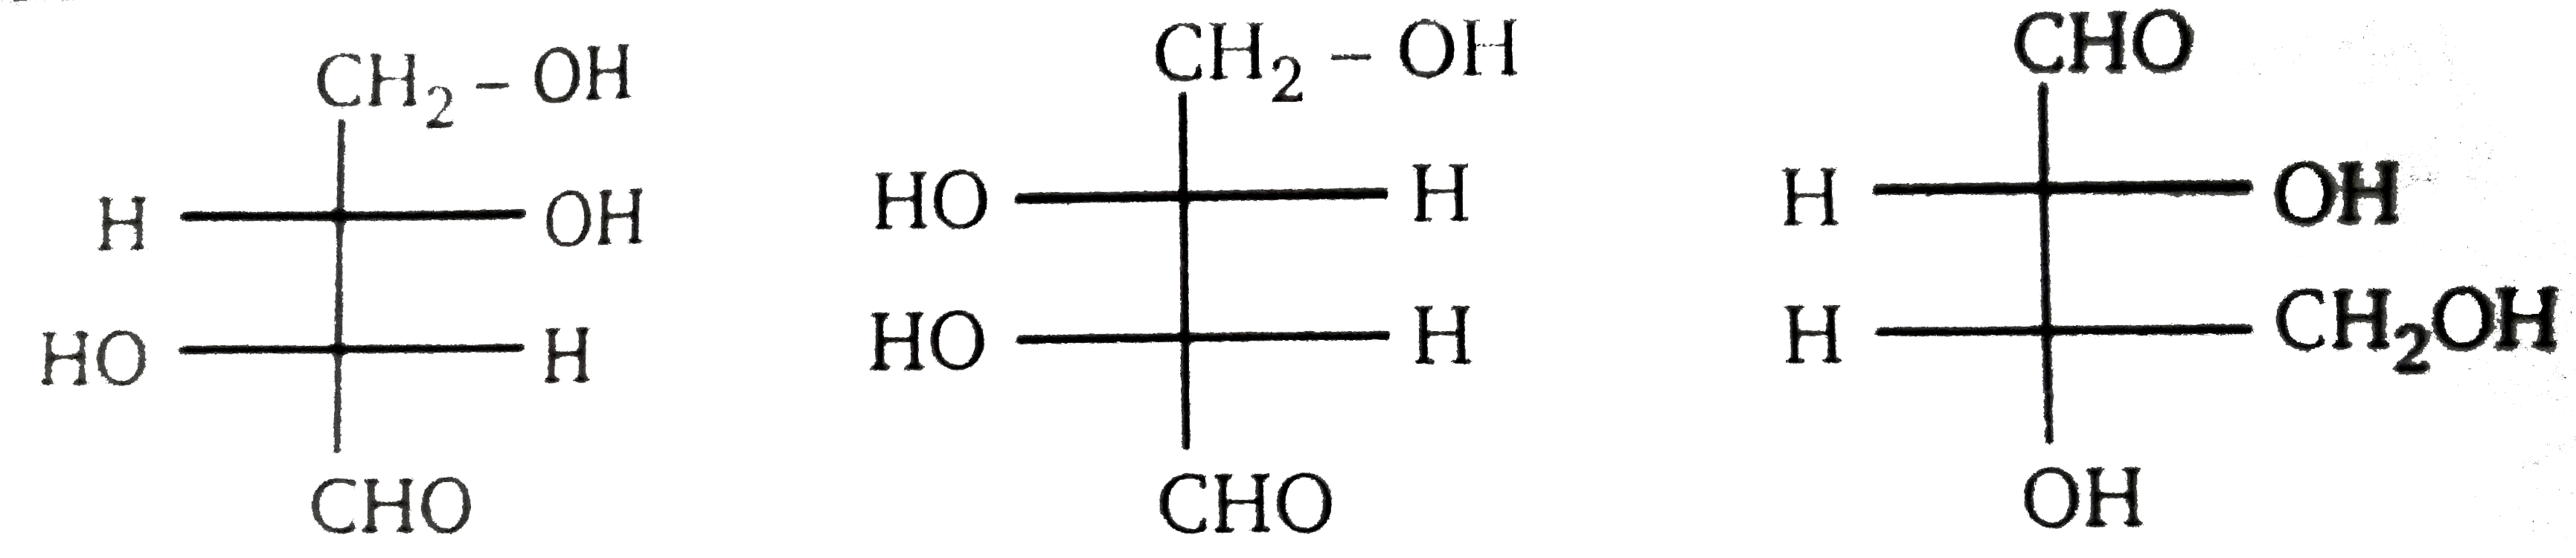 (D) & (L) configuration of above carbohydrate is :